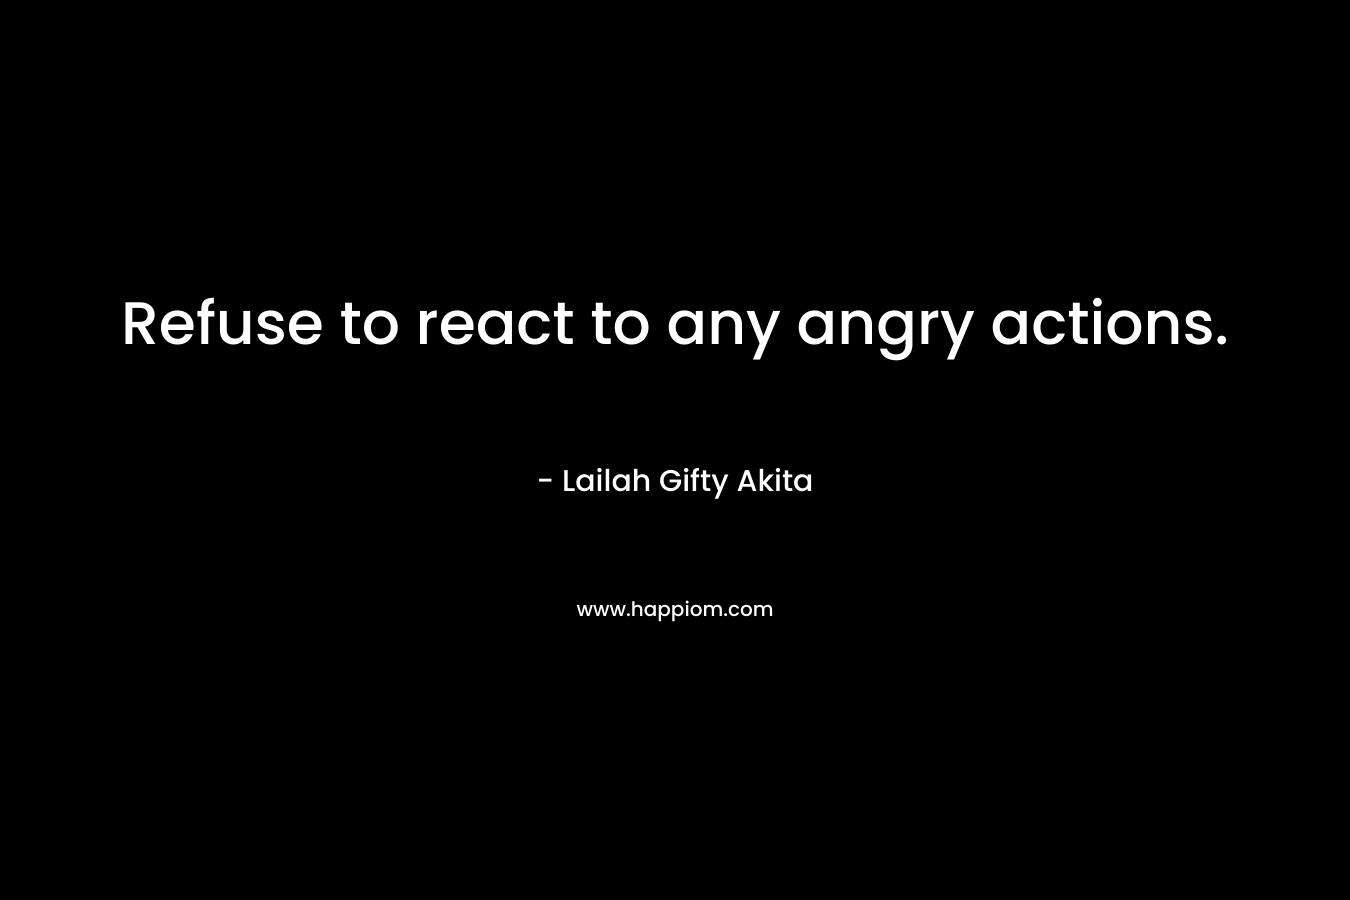 Refuse to react to any angry actions.